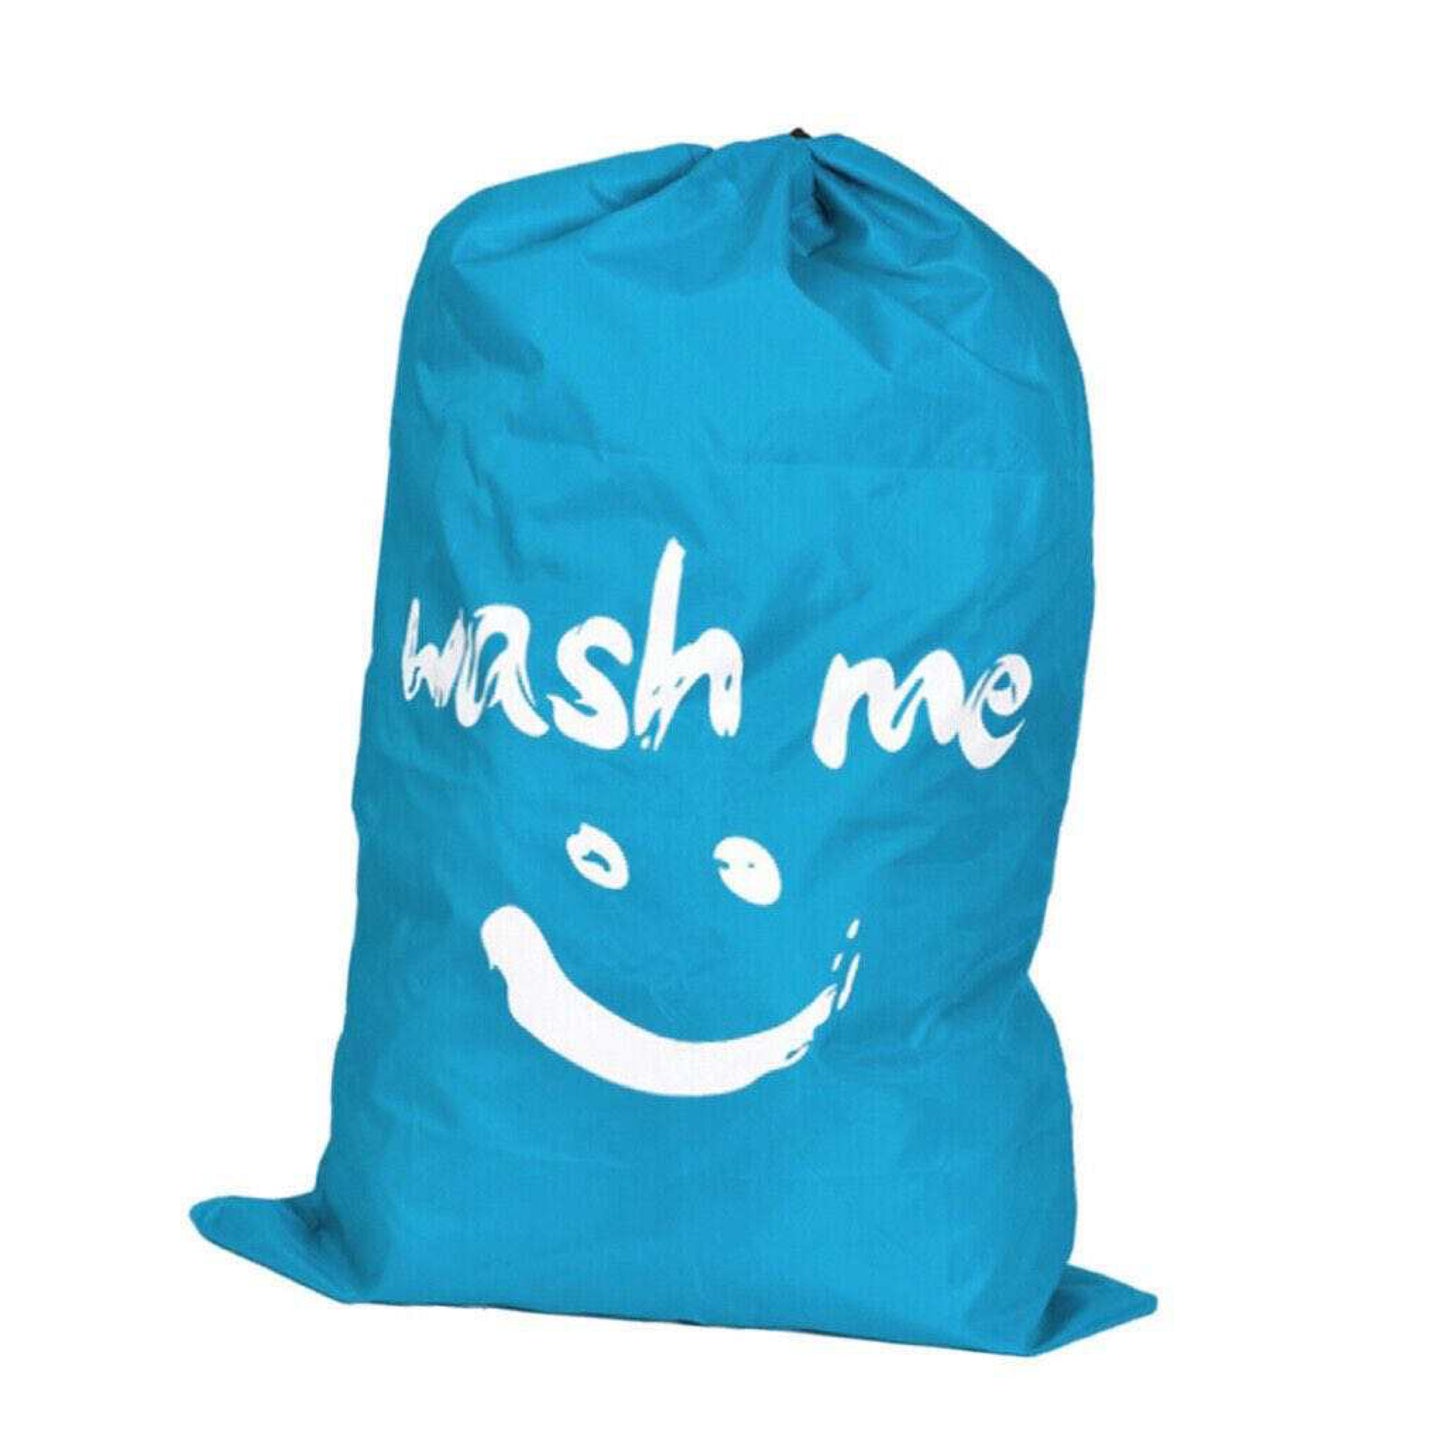 Wash Me Bags